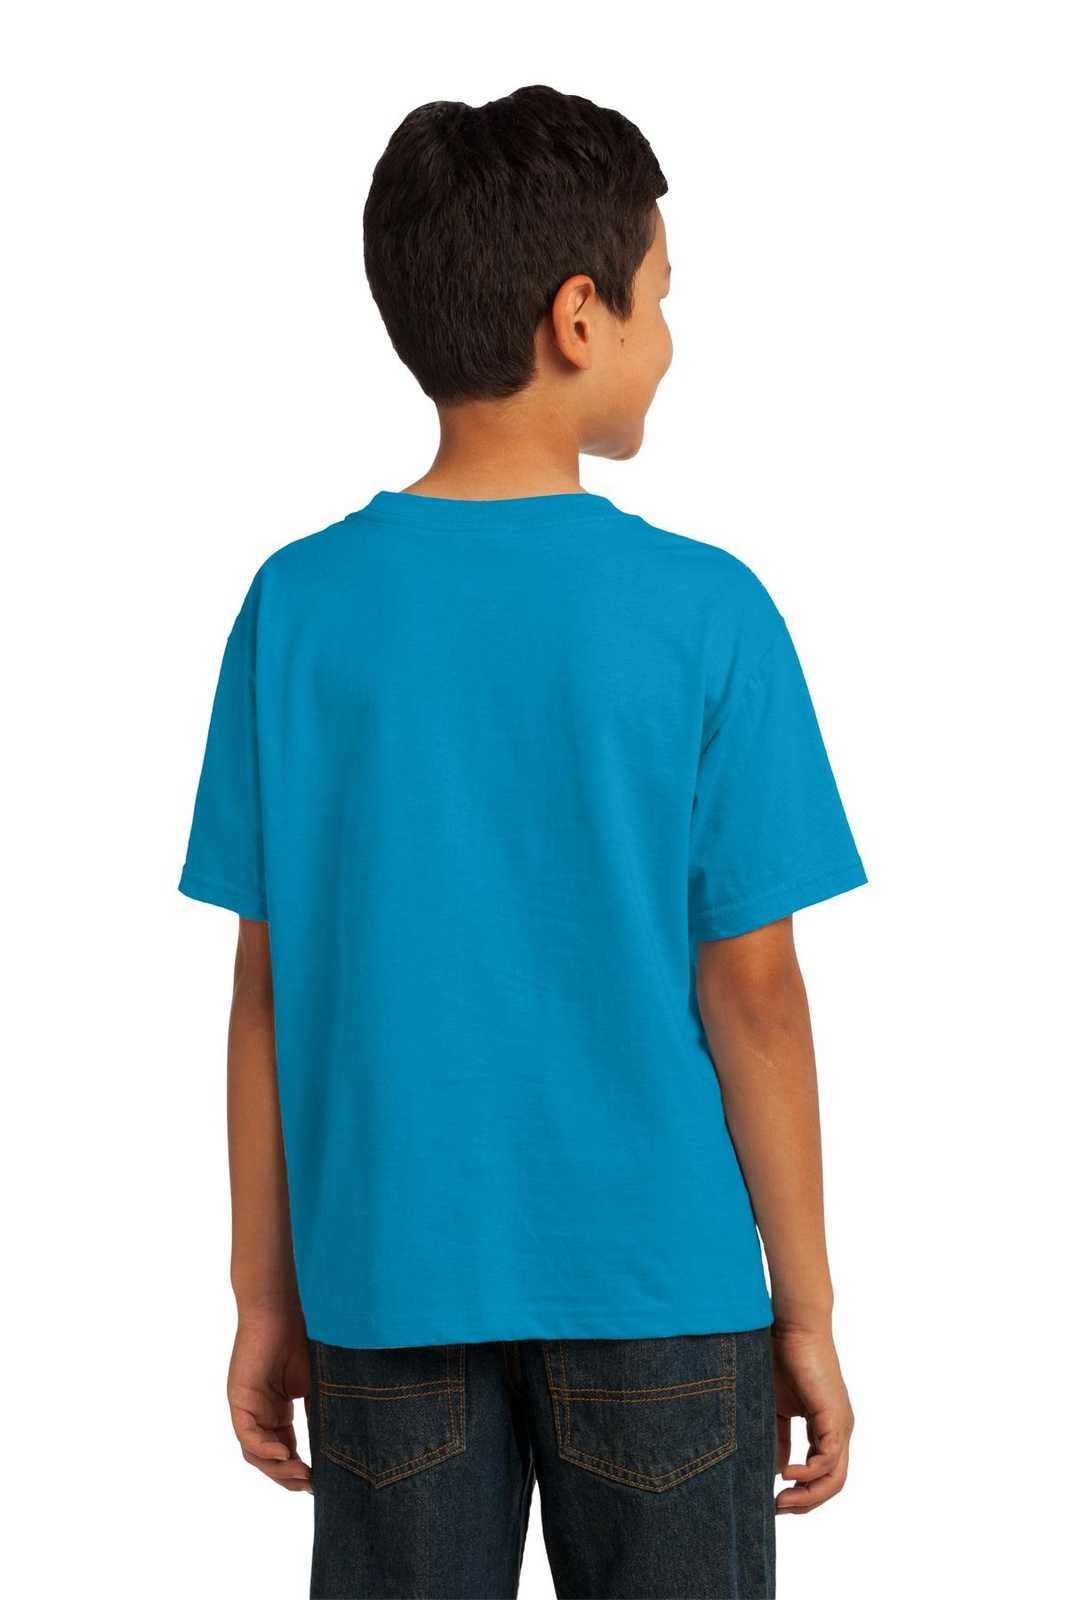 Fruit of the Loom 3930B Youth HD Cotton 100% Cotton T-Shirt - Pacific Blue - HIT a Double